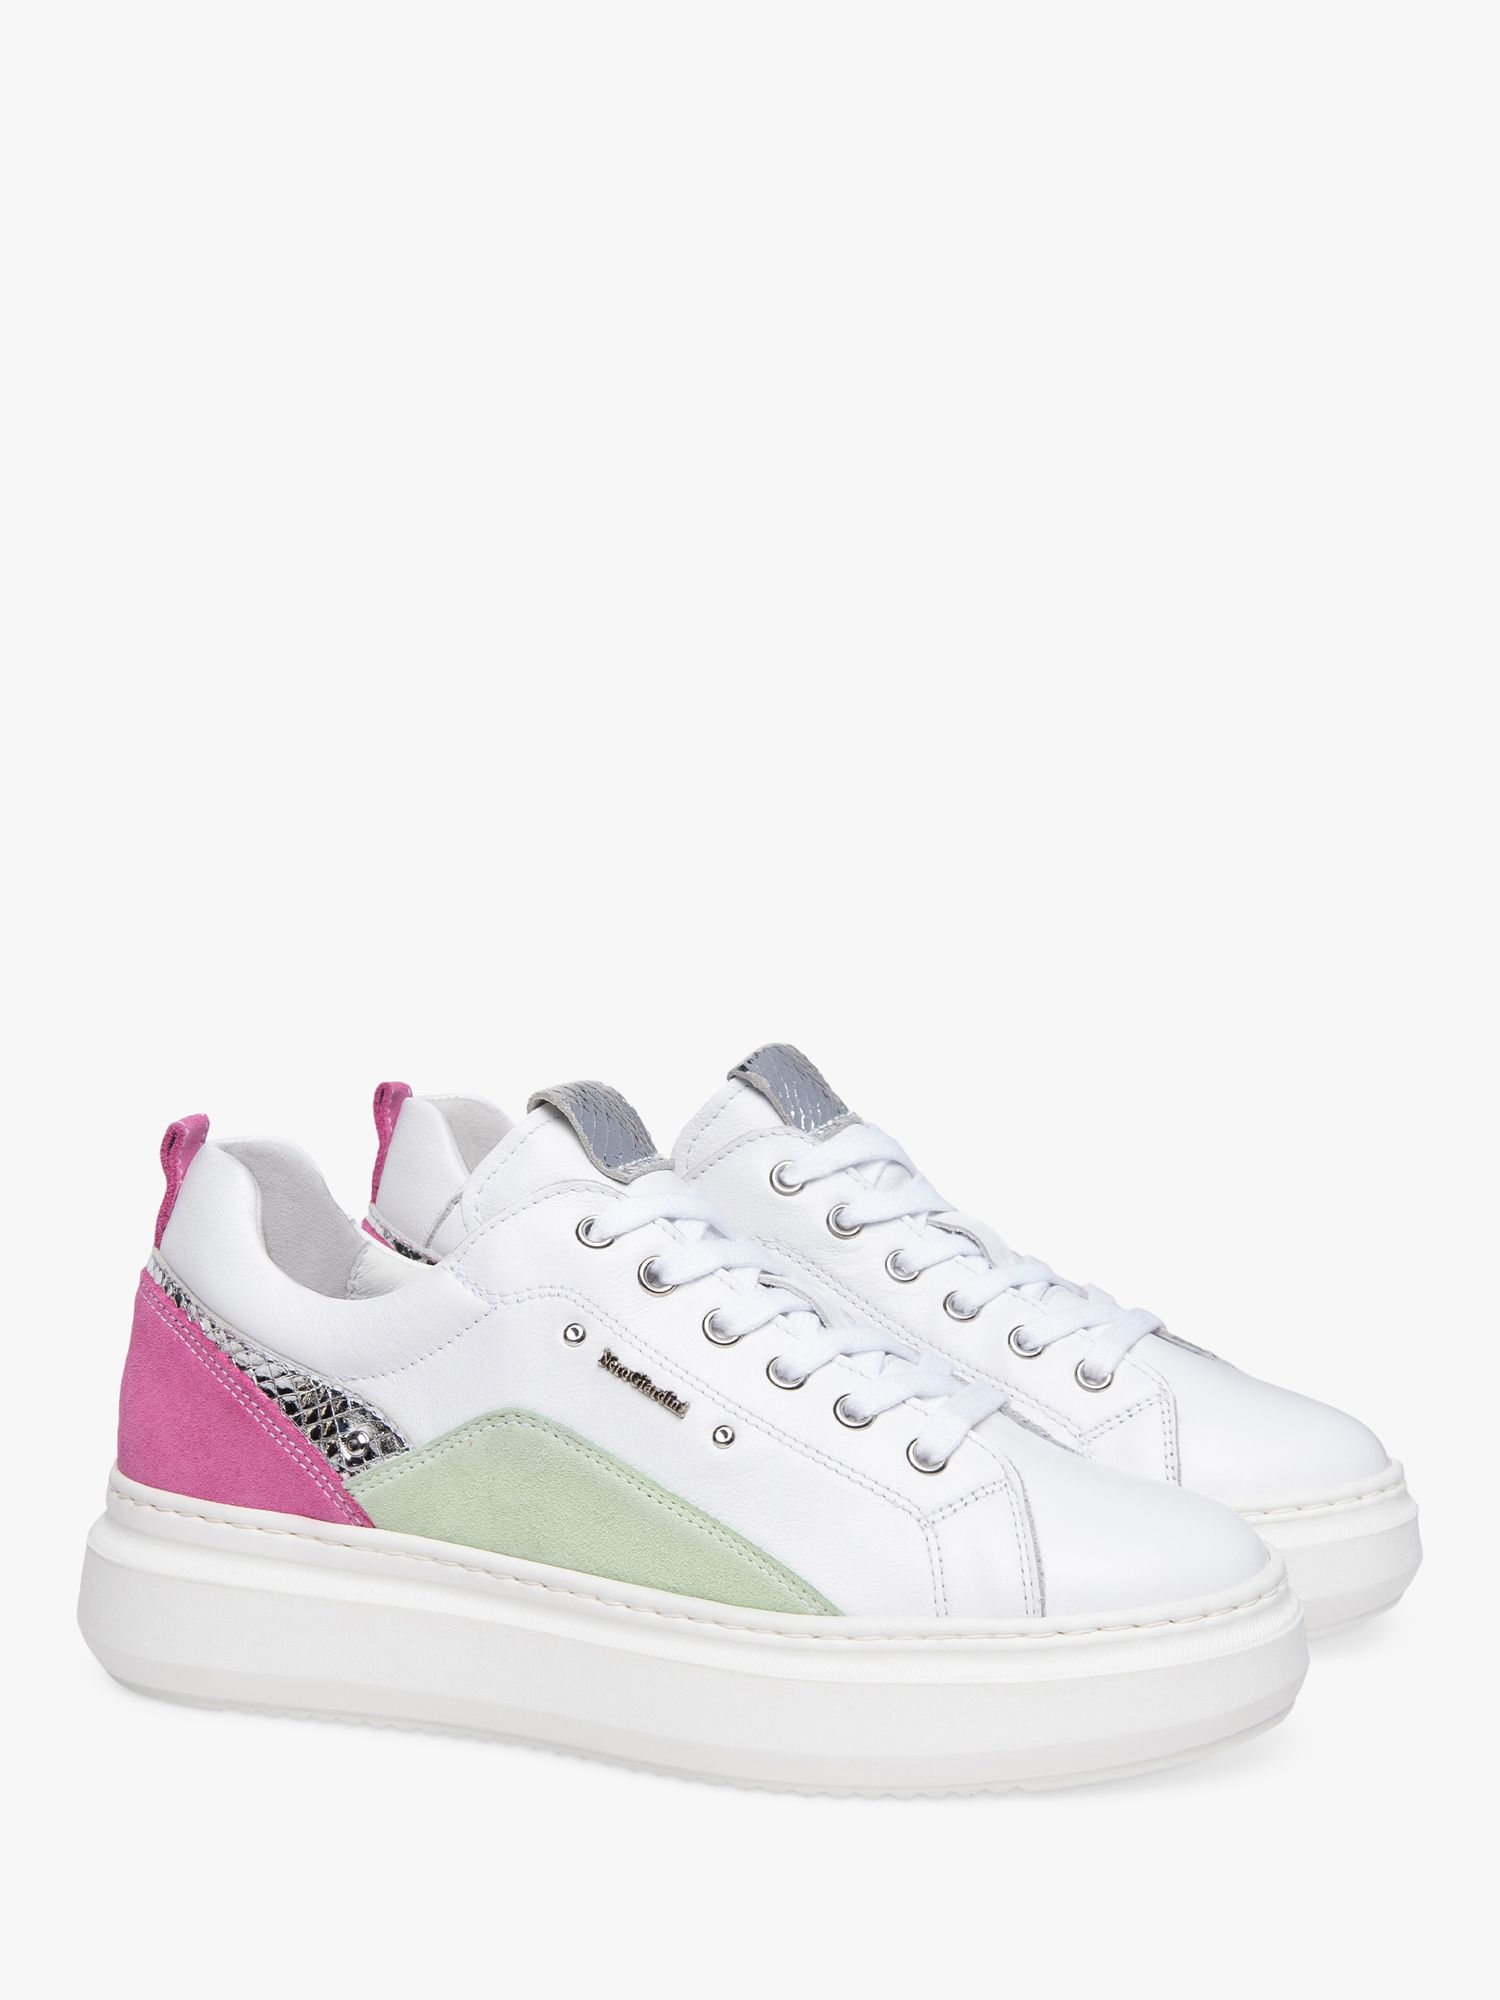 NeroGiardini Leather Lace Up Trainers, White/Pink at John Lewis & Partners